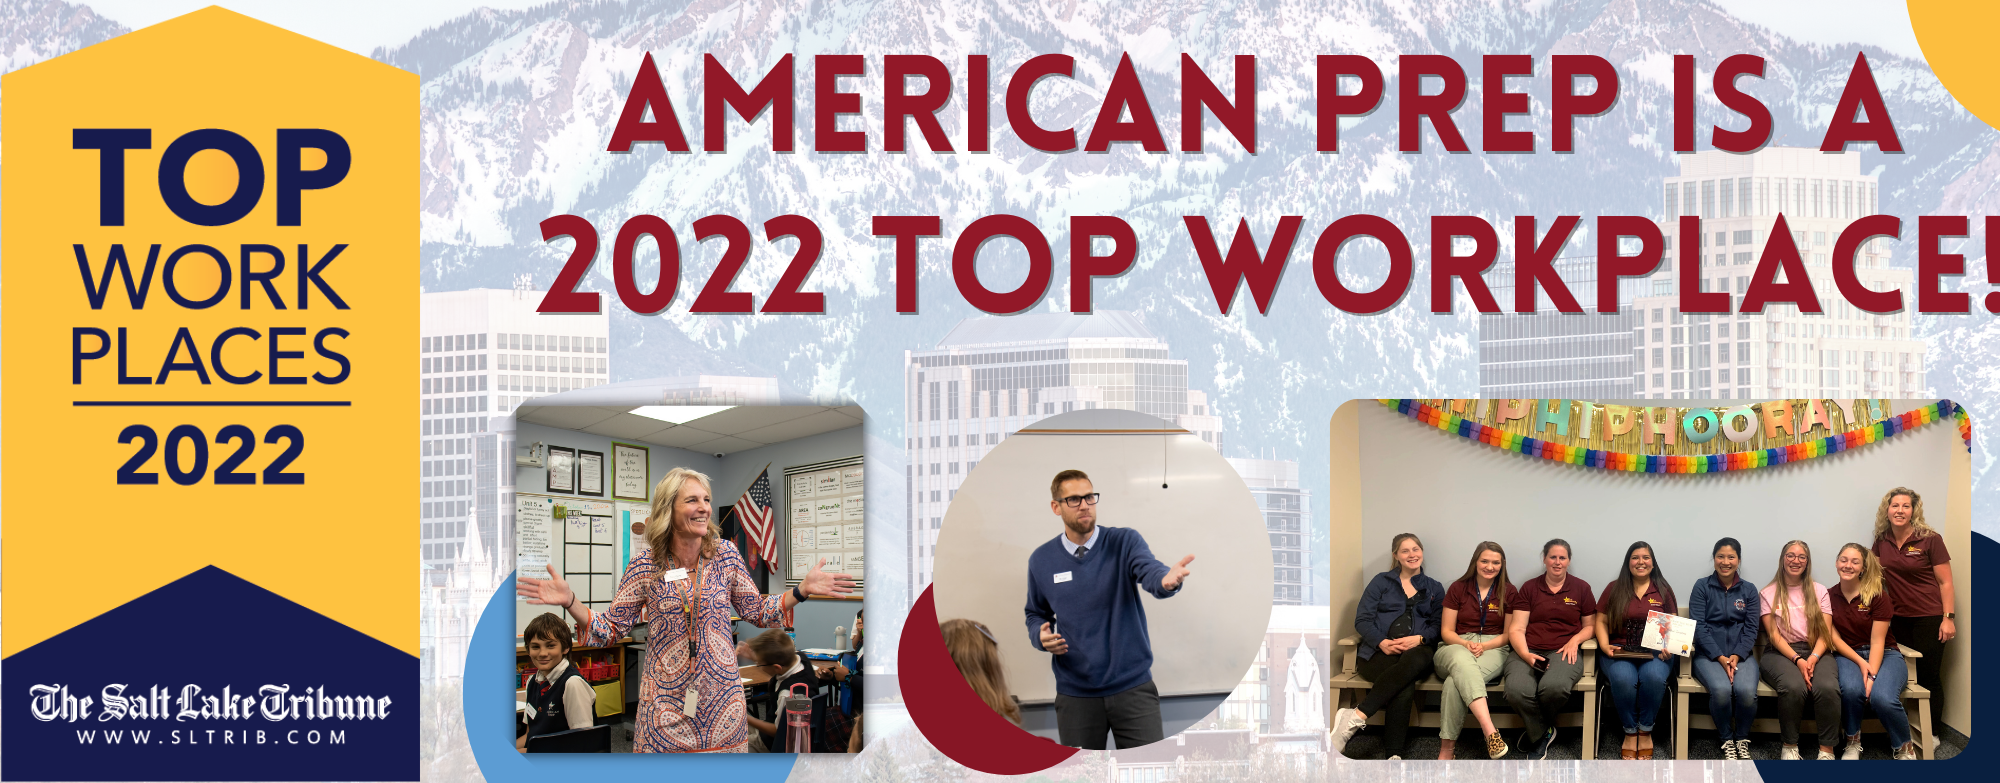 Top WorkPlaces 2022 Banner